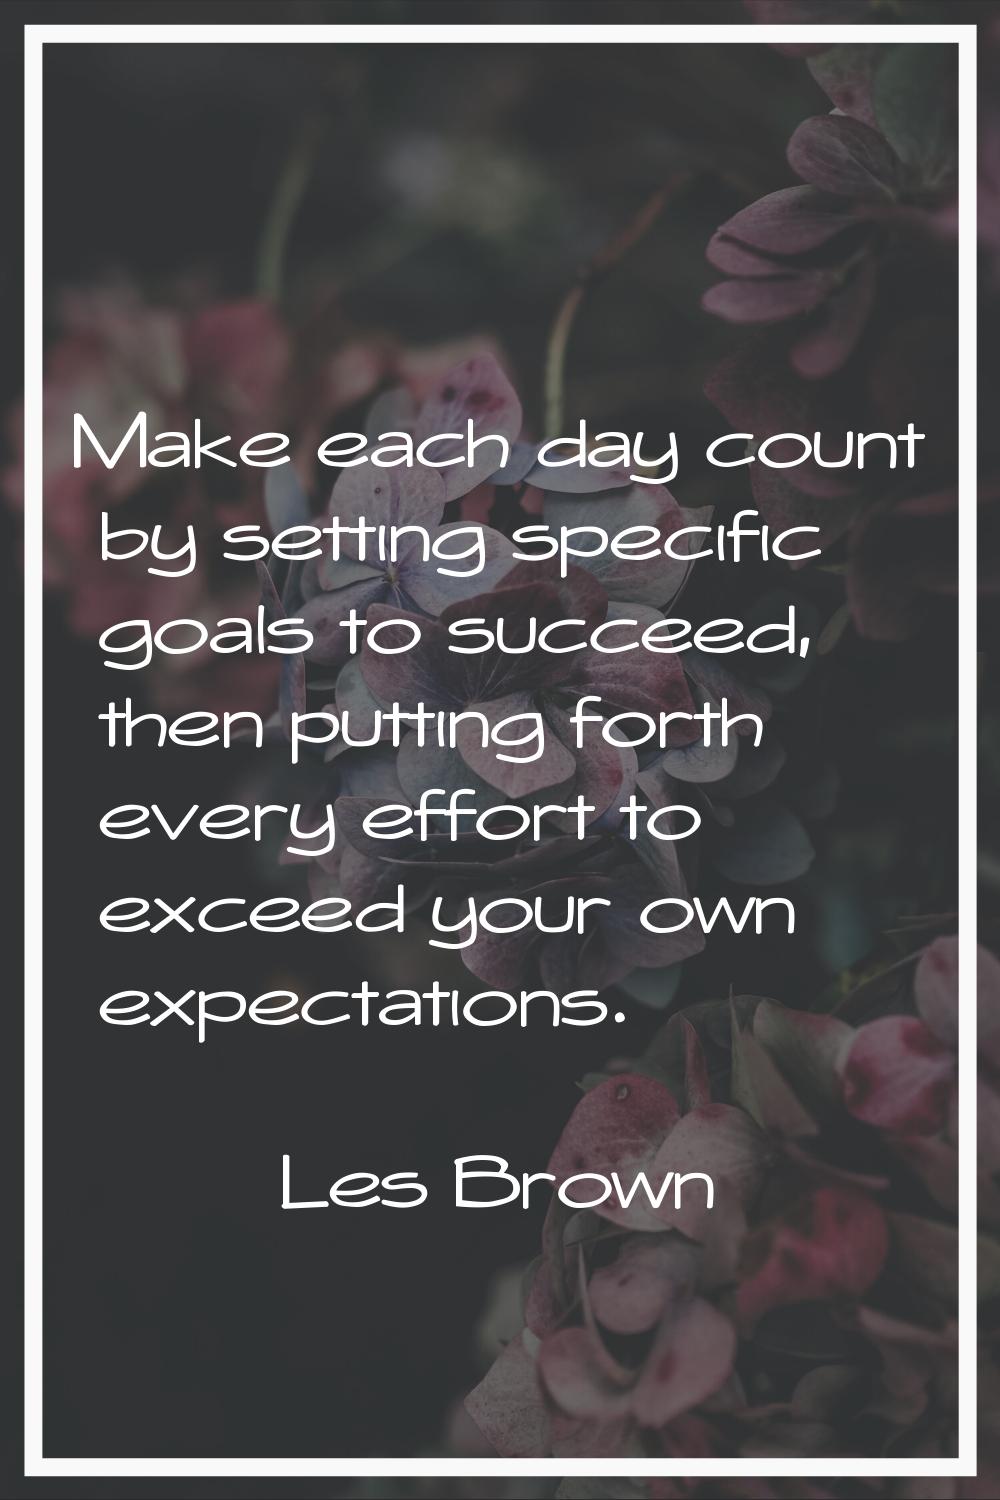 Make each day count by setting specific goals to succeed, then putting forth every effort to exceed